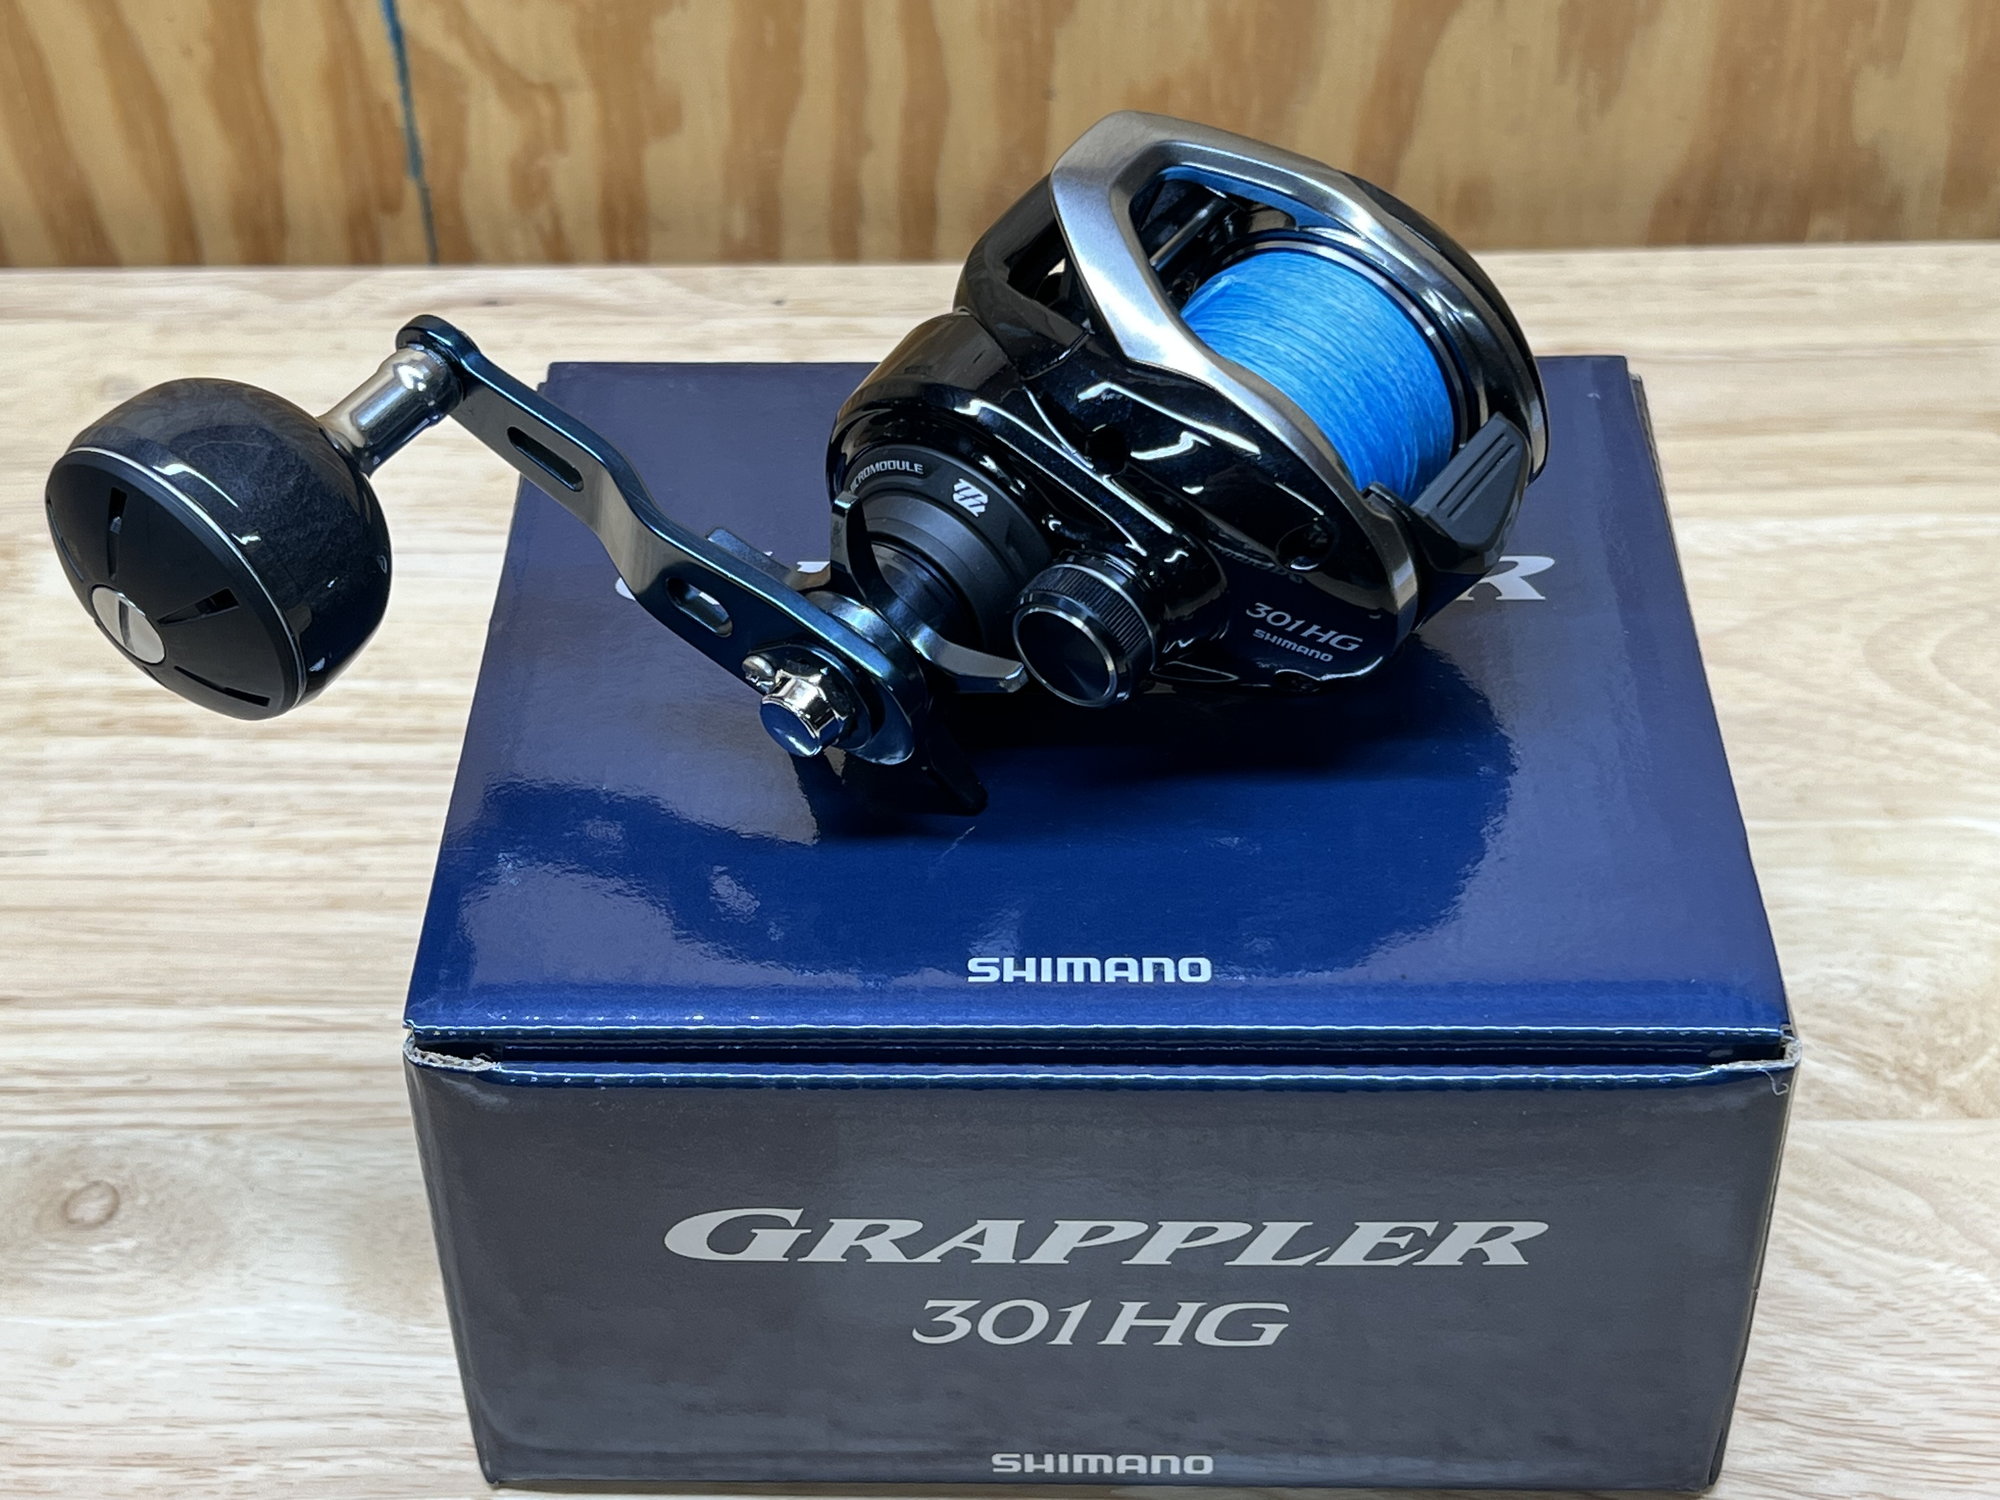 Shimano Grappler 301L Reel - The Hull Truth - Boating and Fishing Forum